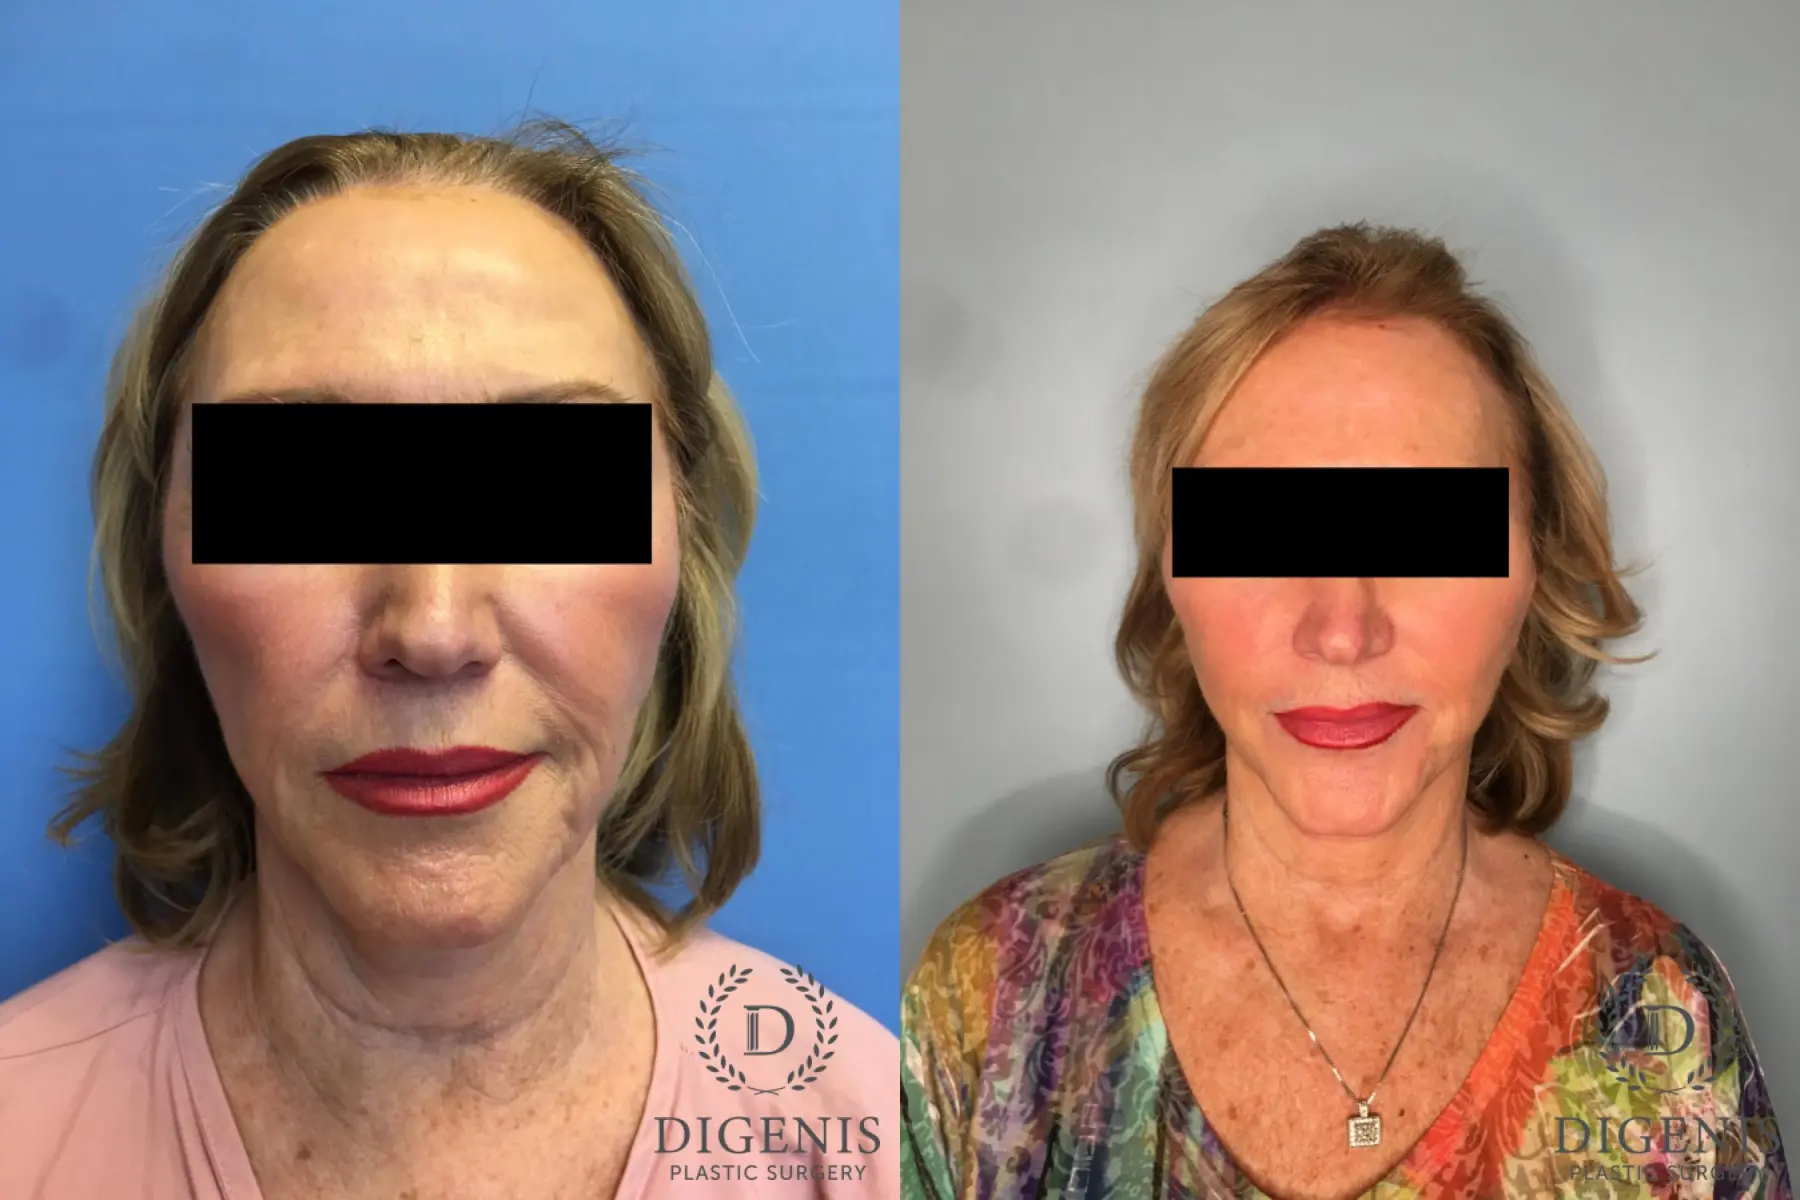 Facelift: Patient 25 - Before and After 1